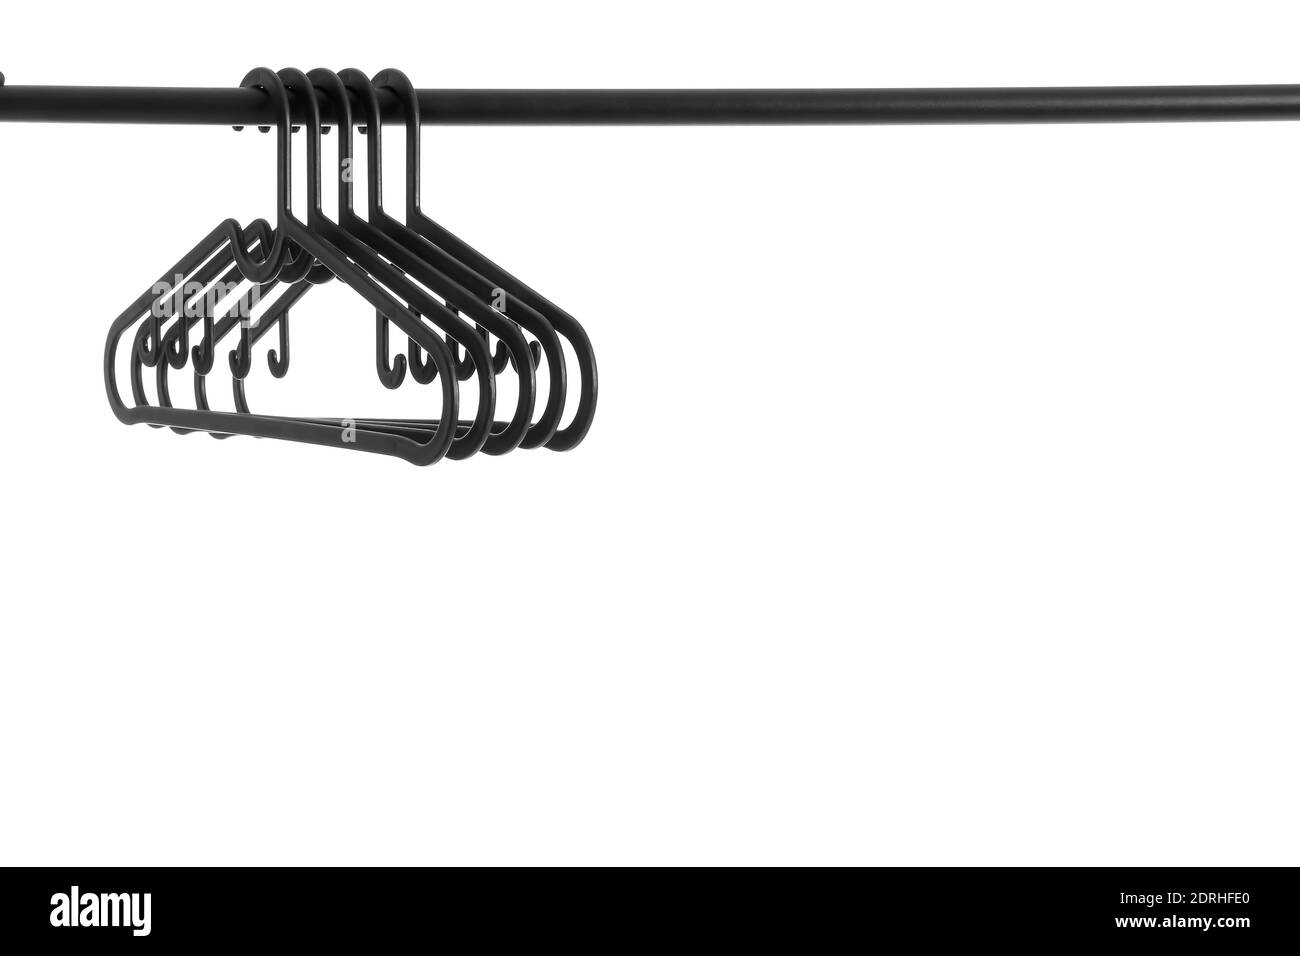 Rack with clothes hangers on white background Stock Photo